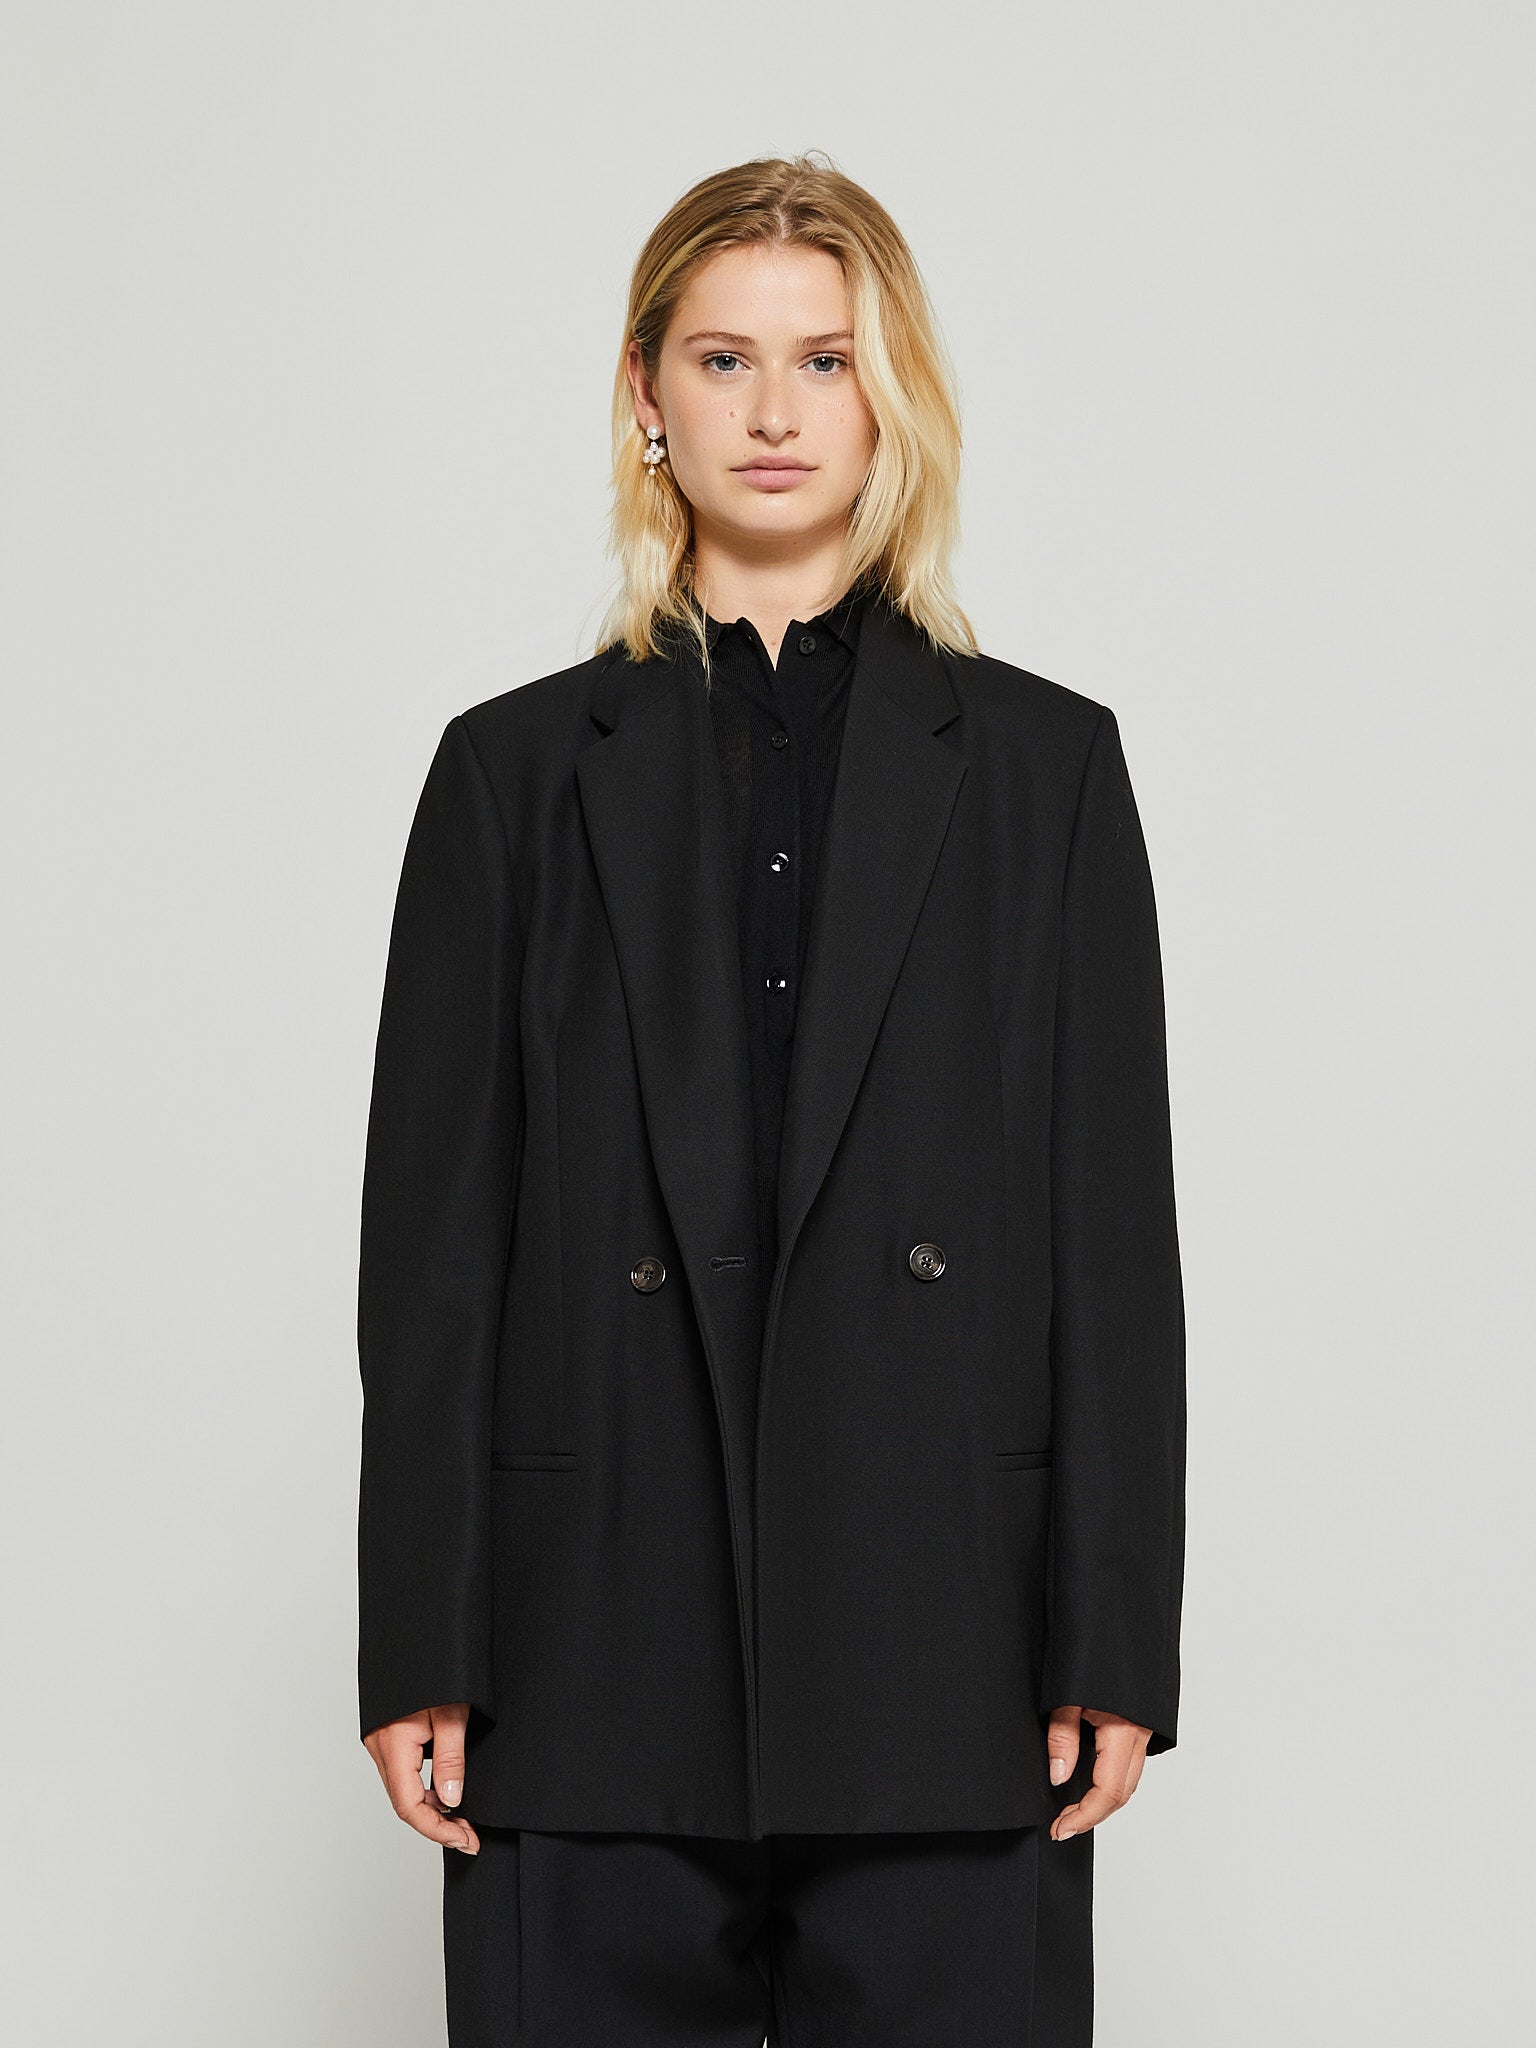 TOTEME - Double-Breasted Blazer in Black